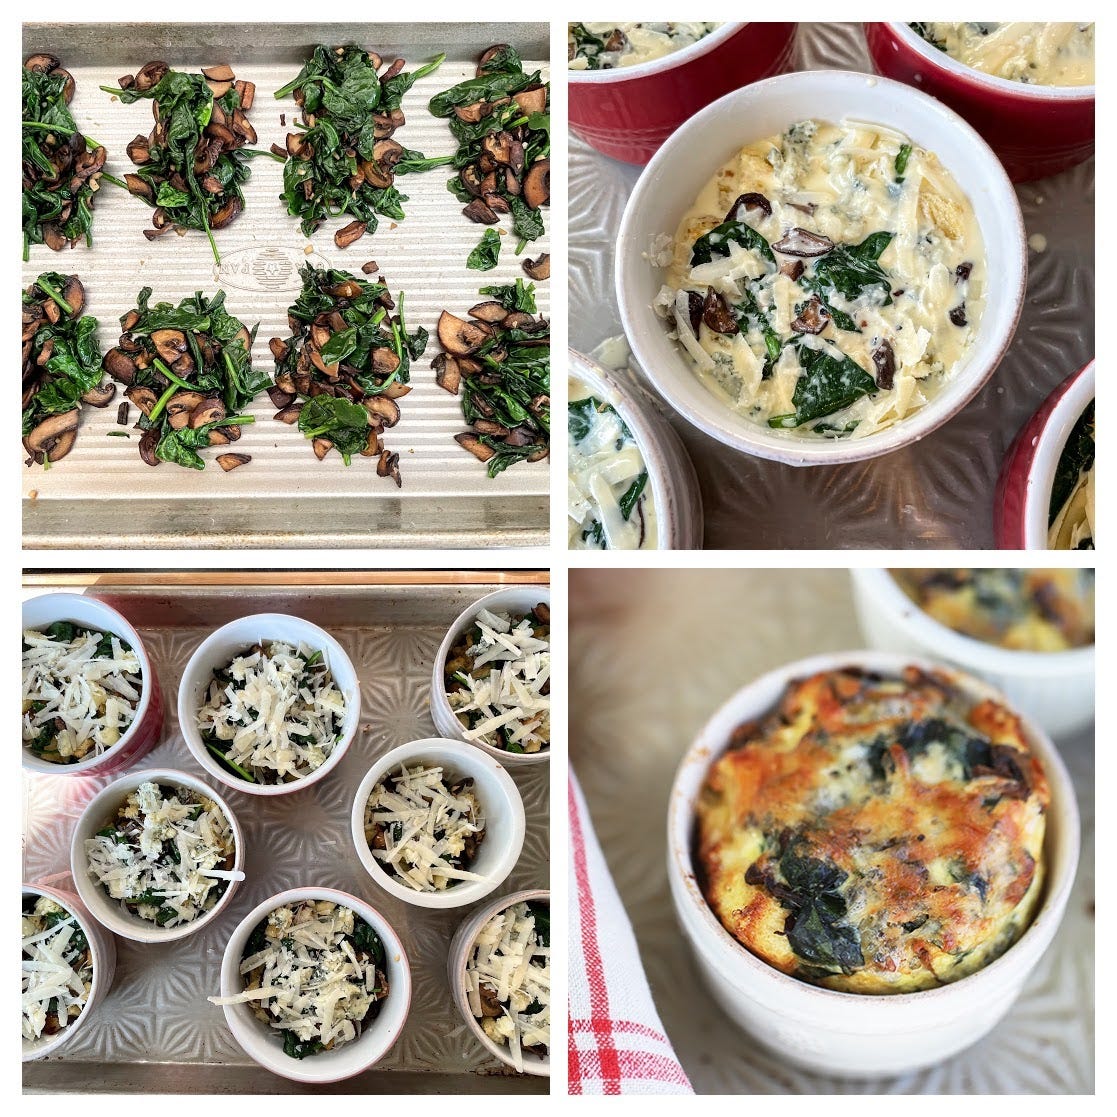 Savory Bread Puddings, Cook the Vineyard